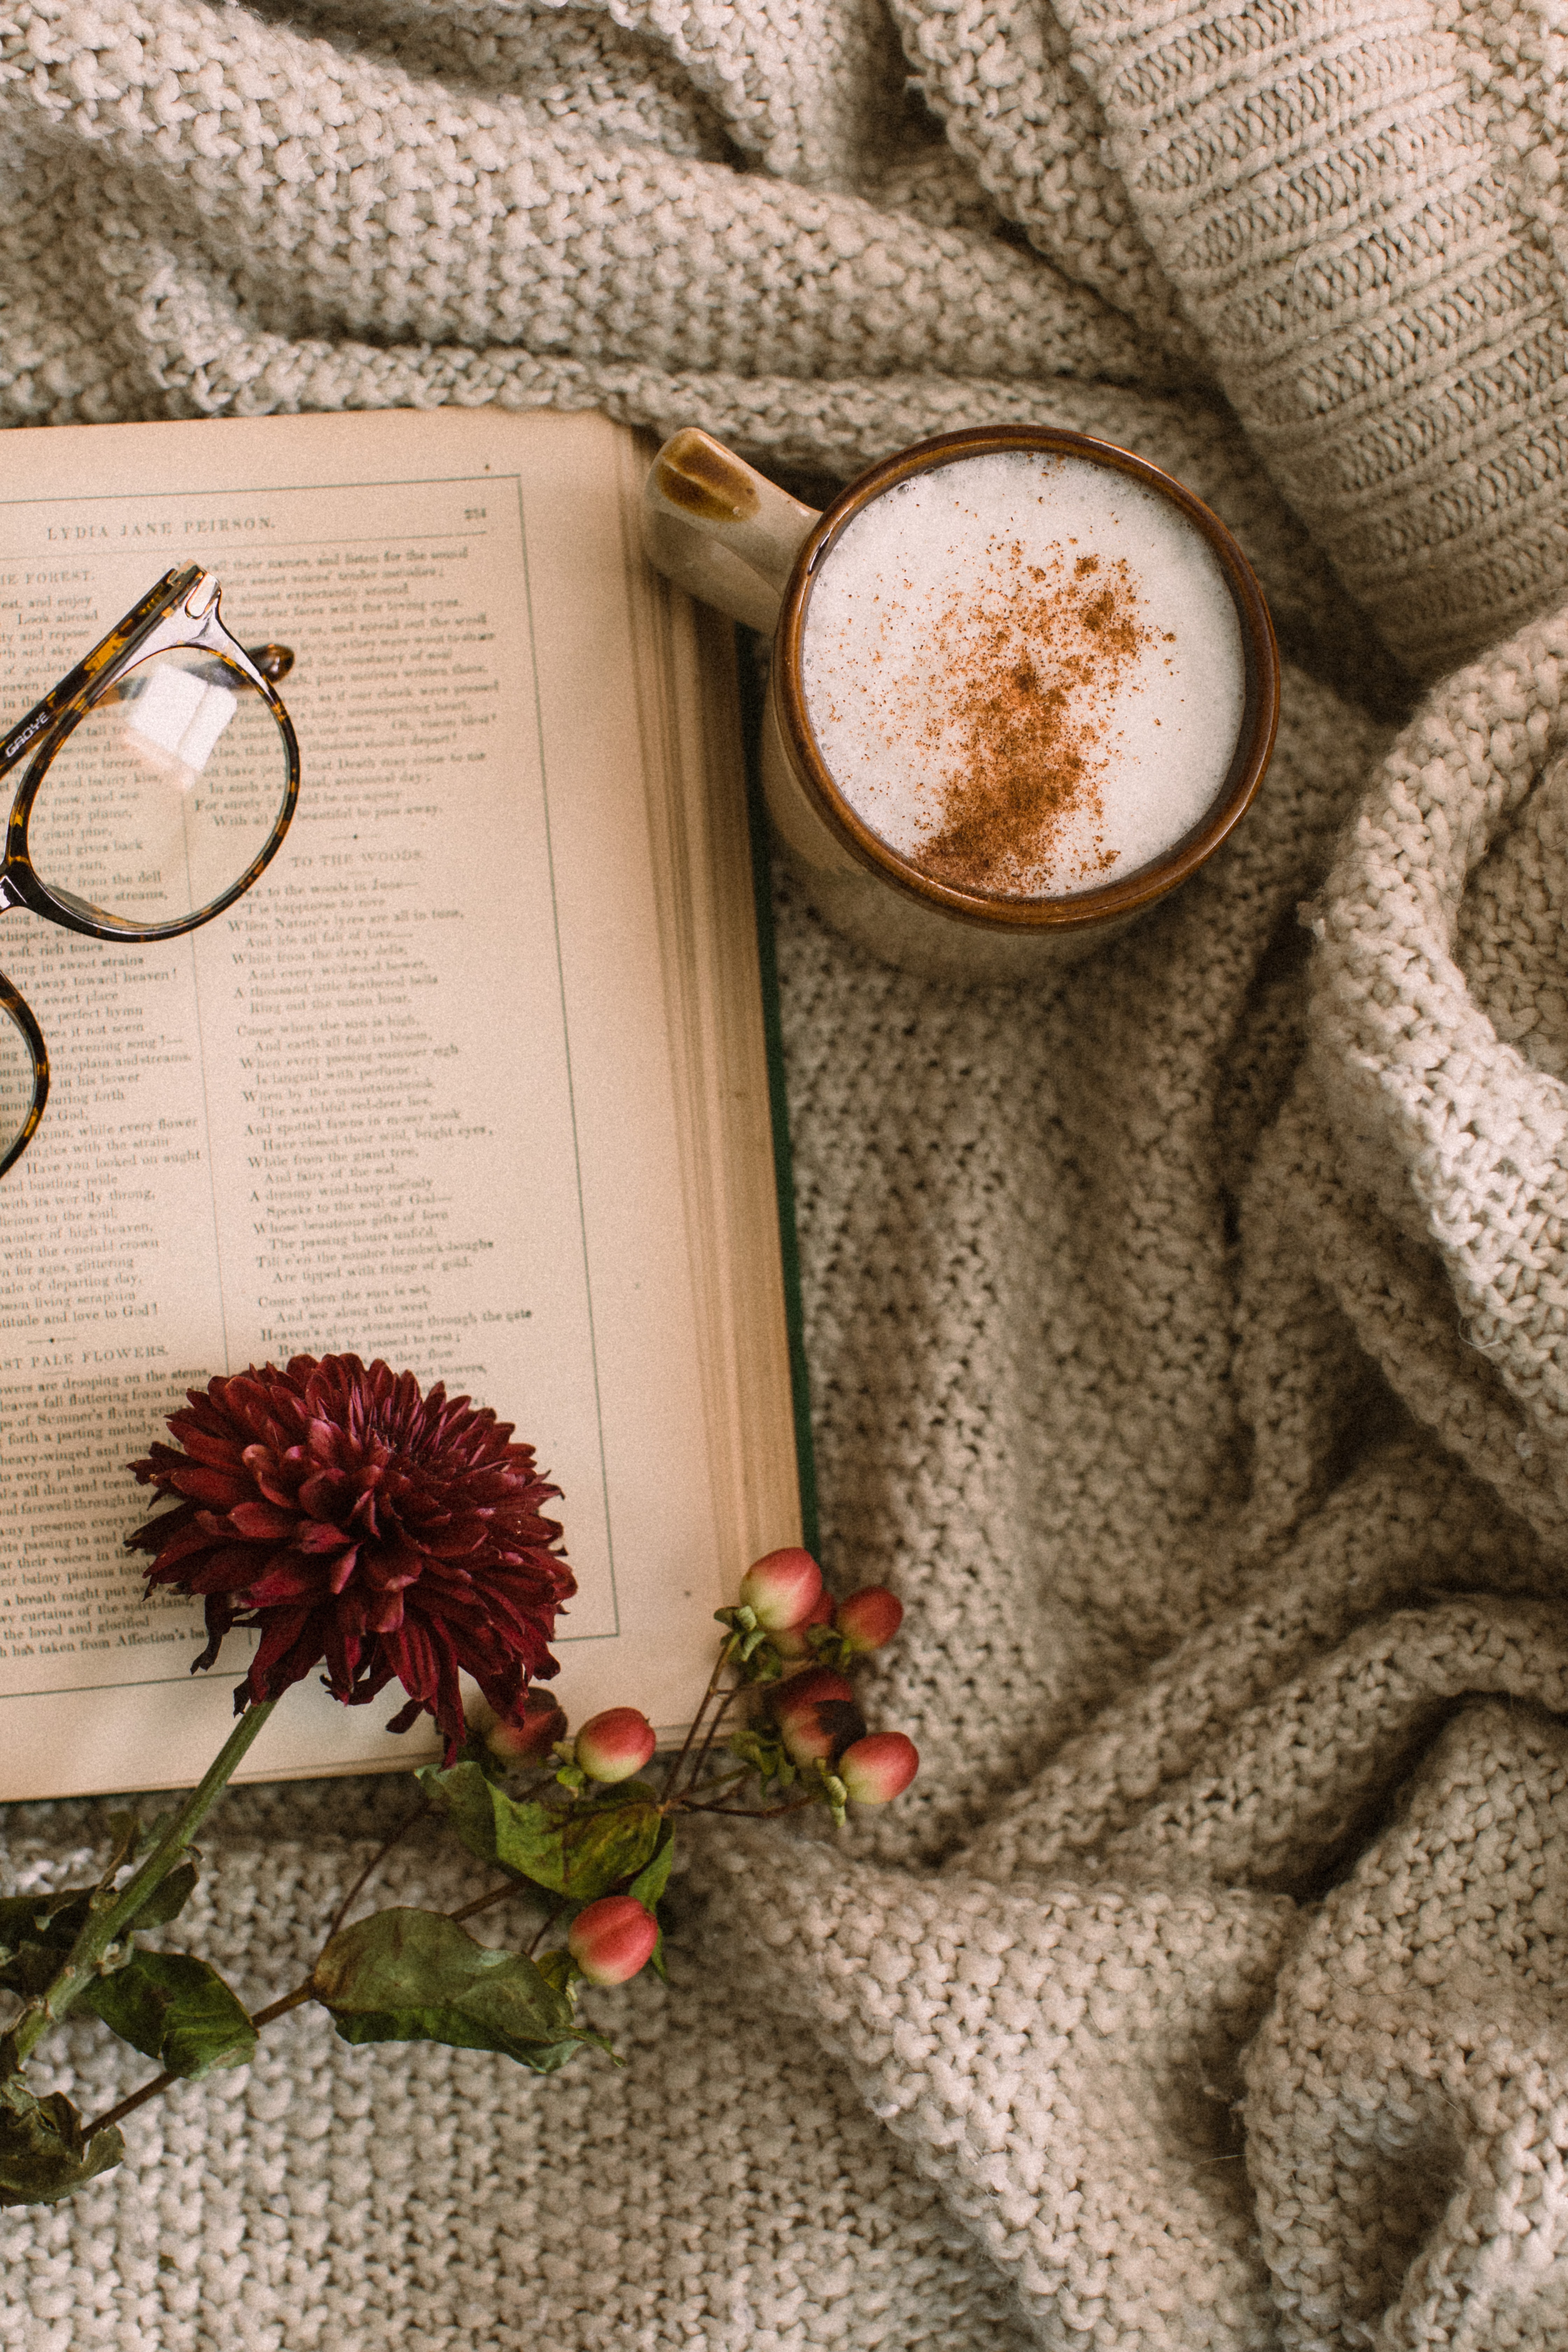 book, cup, food, spectacles, flowers, coffee, cappuccino, glasses, mug Full HD